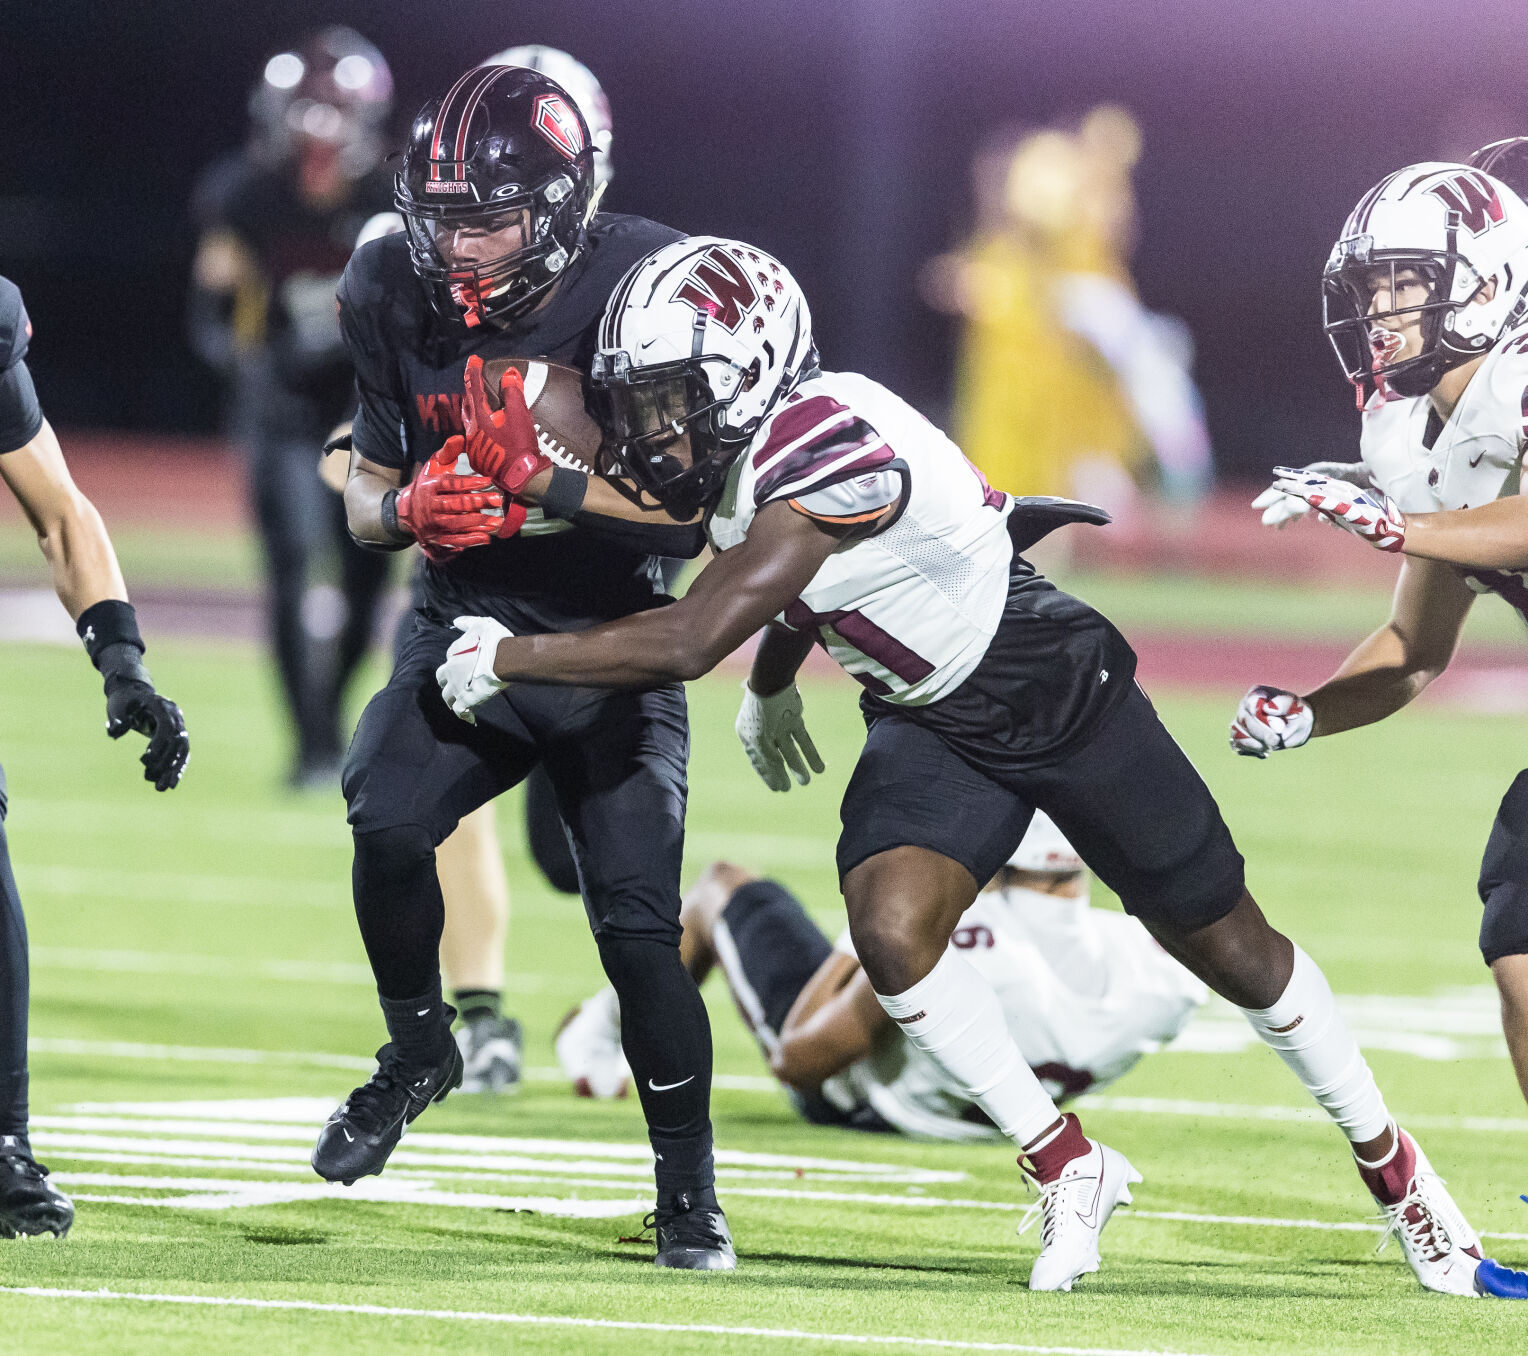 Harker Heights Knights Fall to Pflugerville Weiss Wolves 52-14